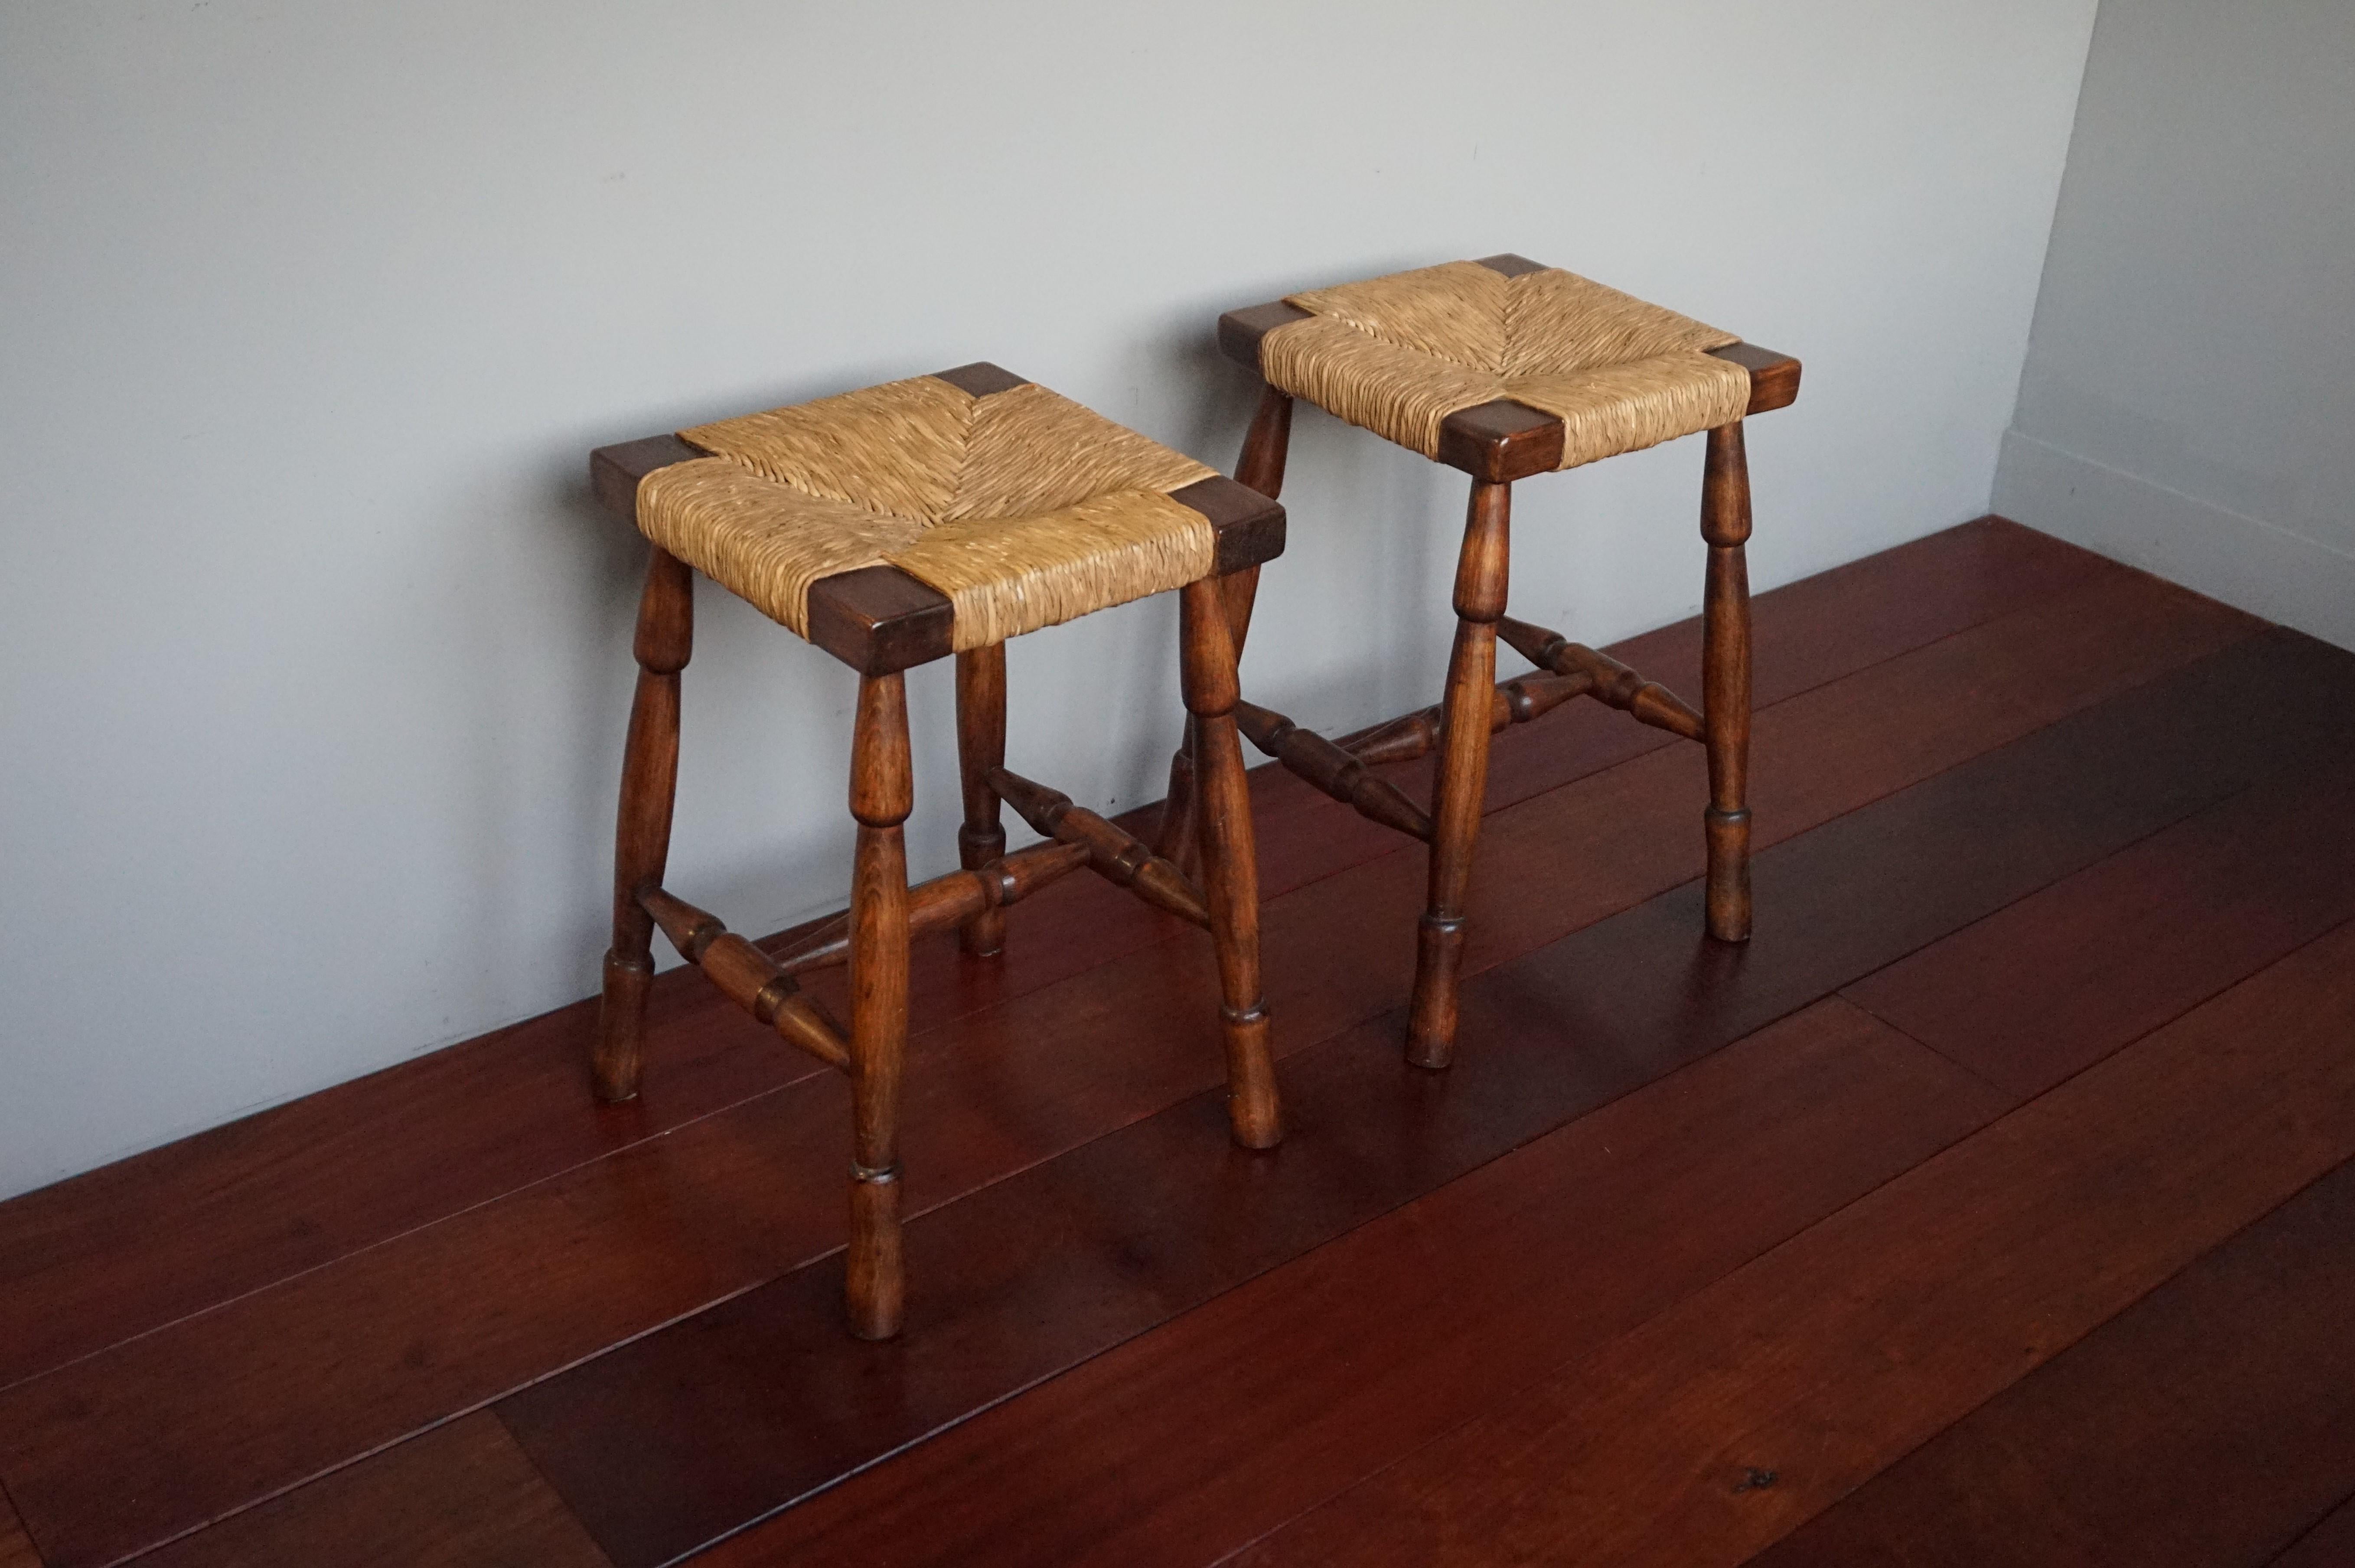 Mint pair of semi-antique stools with handwoven rush seats.

Finding this rare pair of vintage stools was a treat and to have found them in this amazing condition made this find even more rewarding. When you are looking for good and rare pieces in